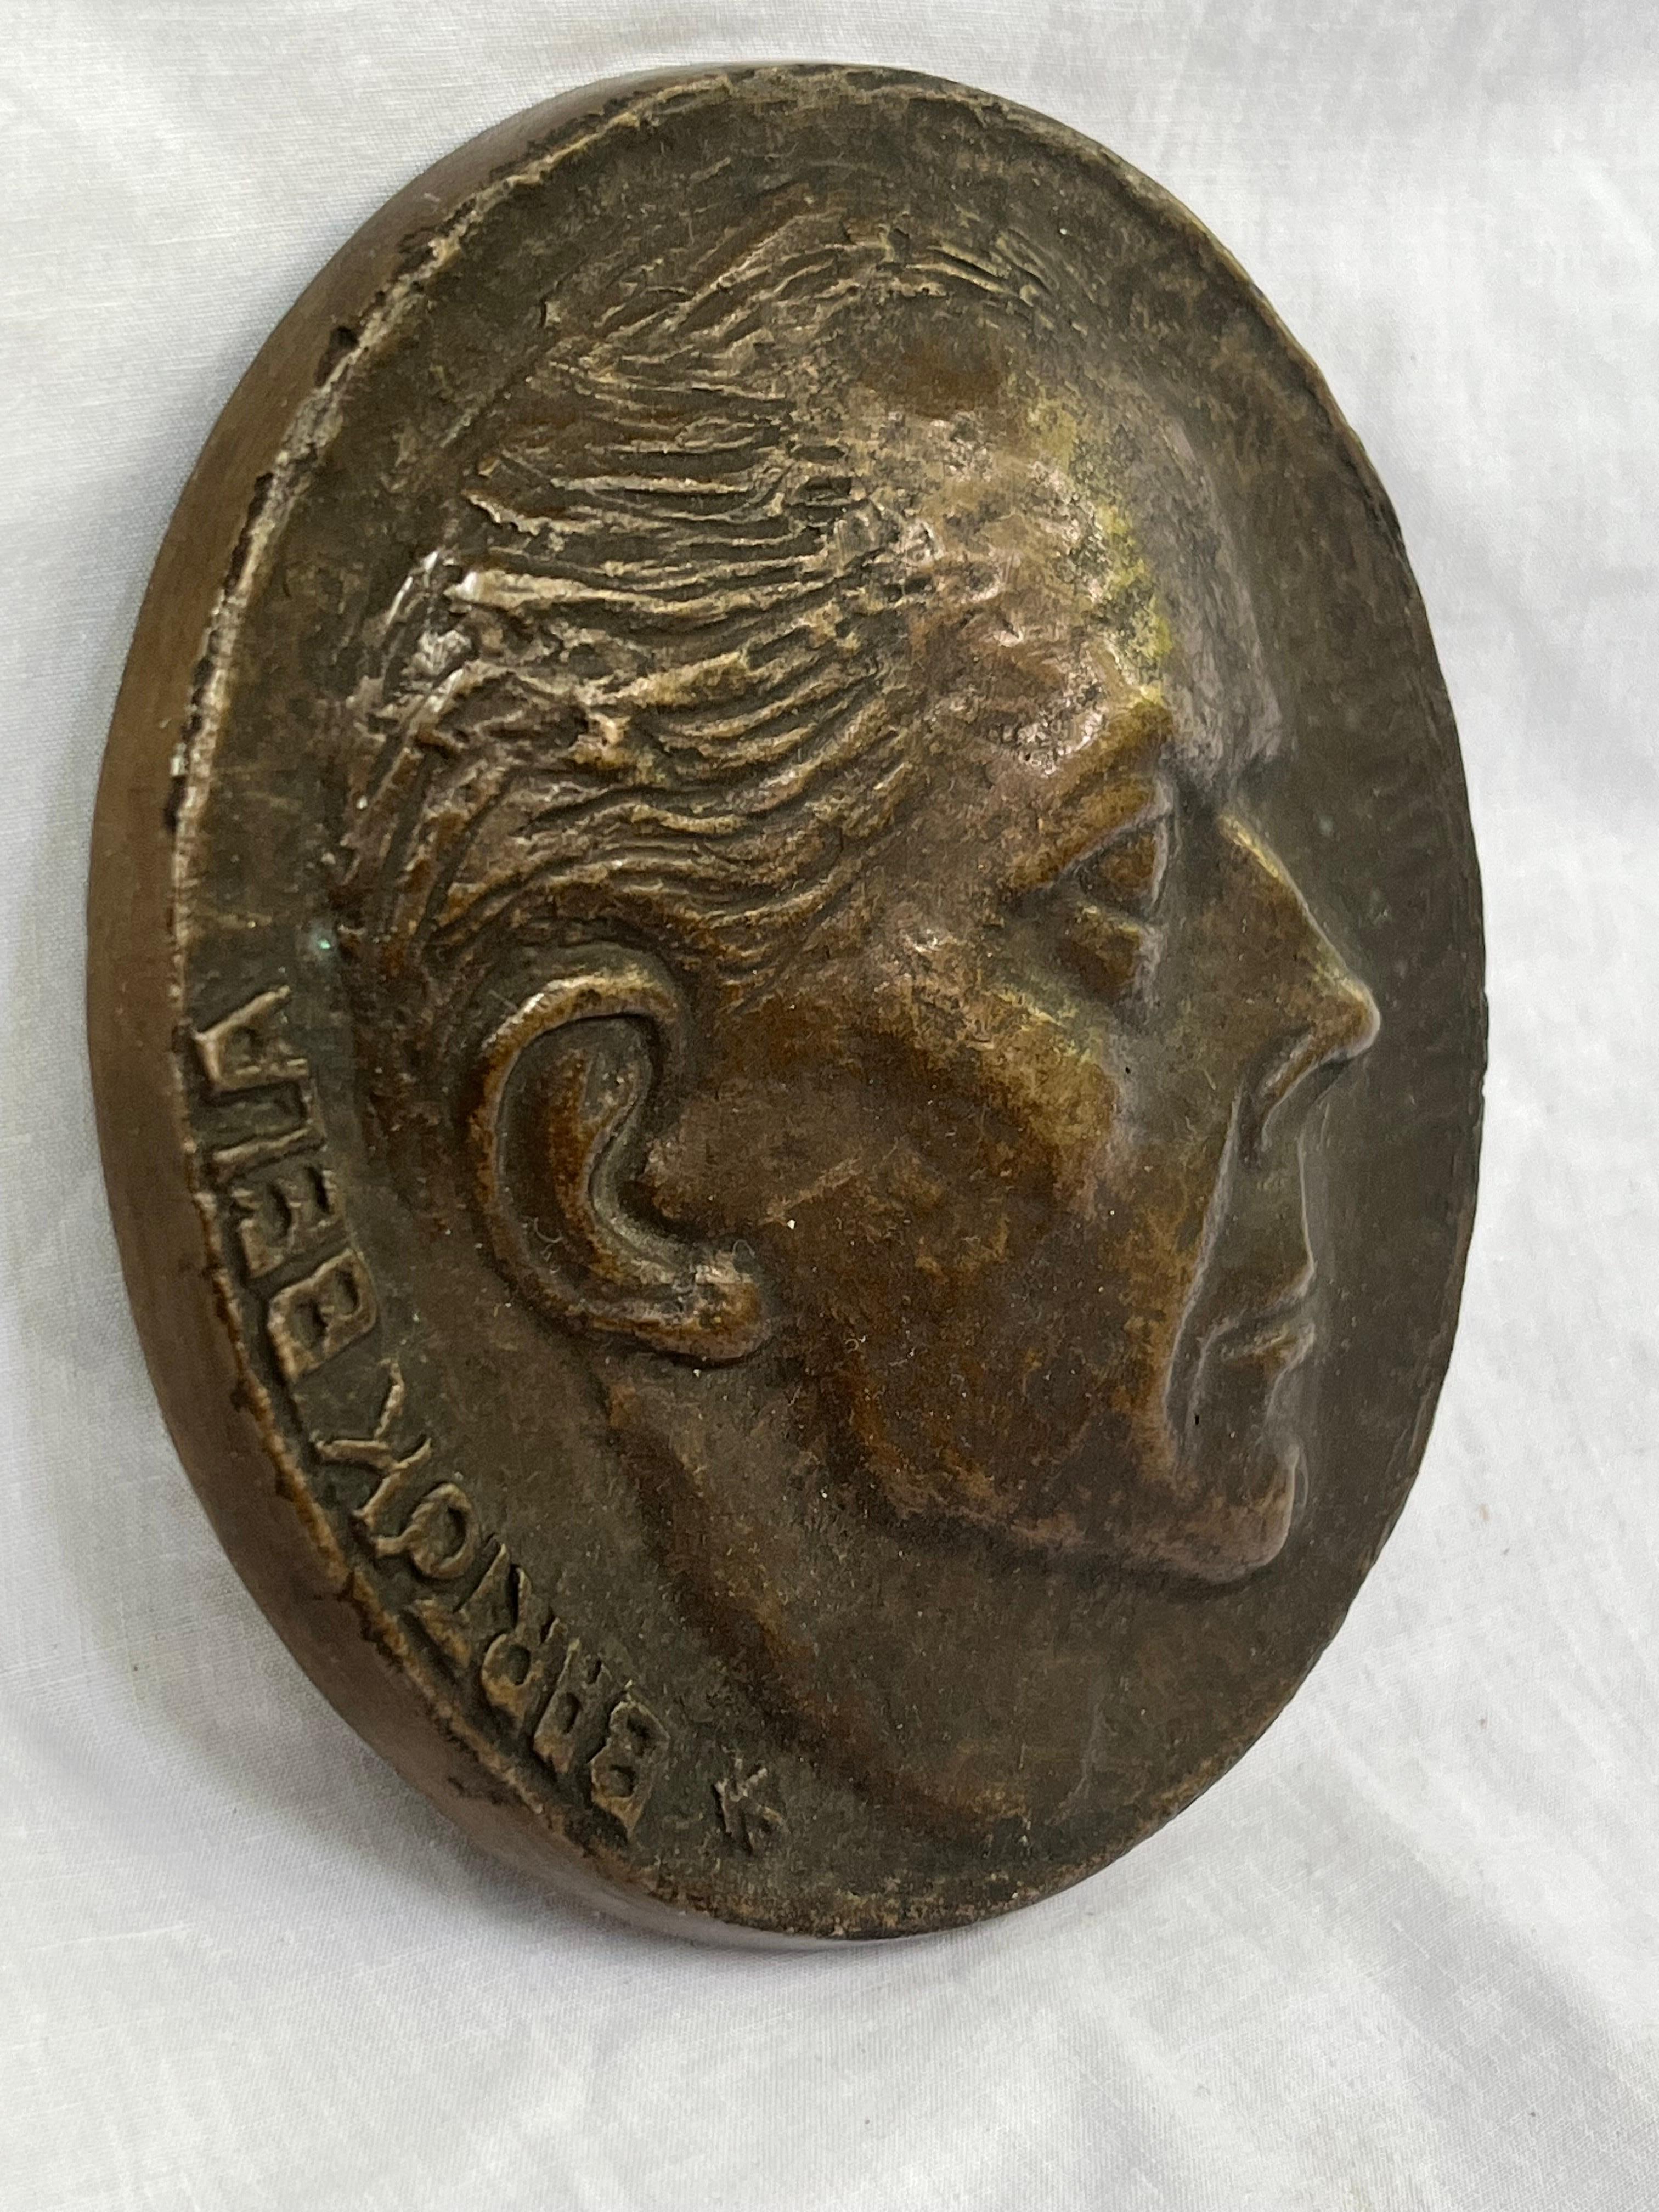 An historic and important bronze medal of the late, great Hungarian composer and ethnomusicologist Bela Bartok (1881 - 1945) by Croatian sculptor and medallist Ivo Kerdić (1881 - 1953). I could only find one other example of this particular casting